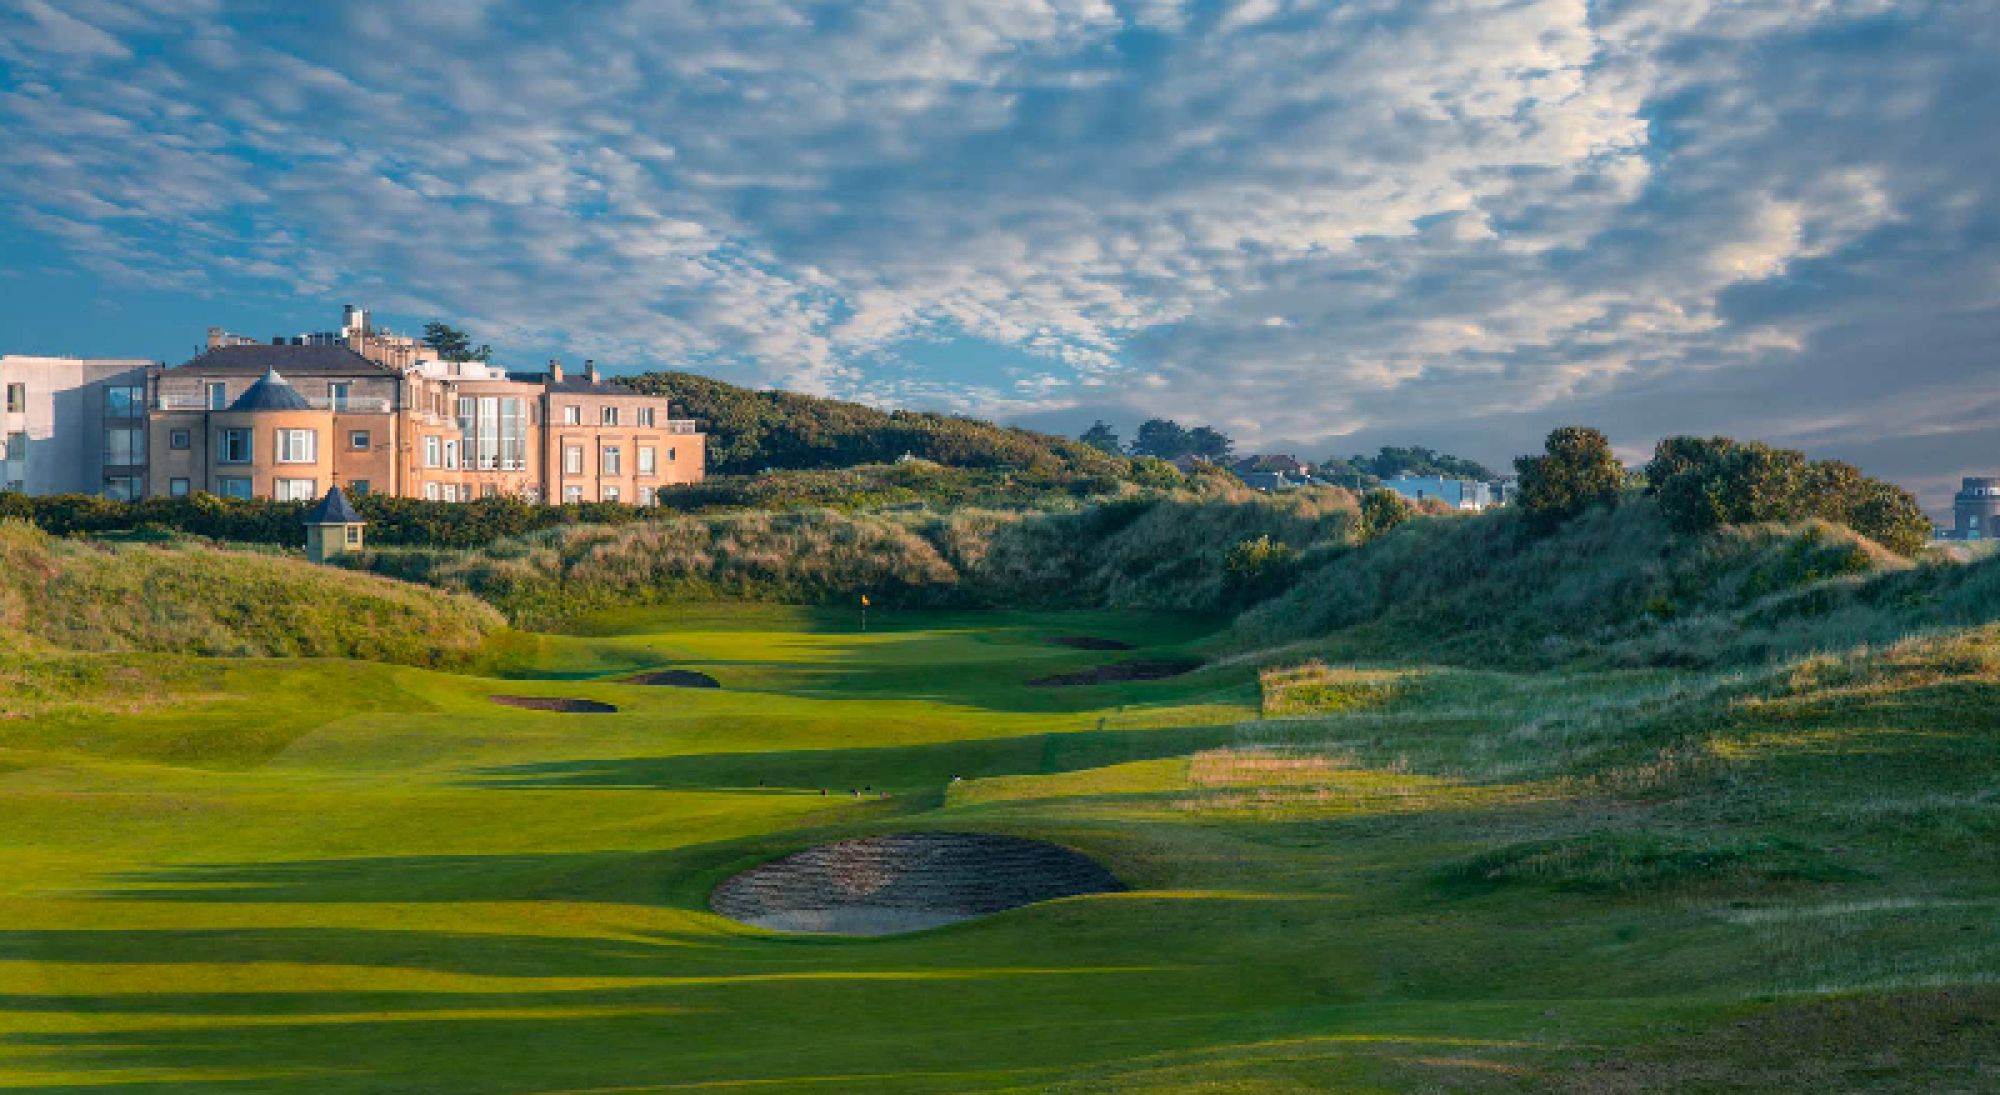 Portmarnock Links provides among the finest golf course in Southern Ireland